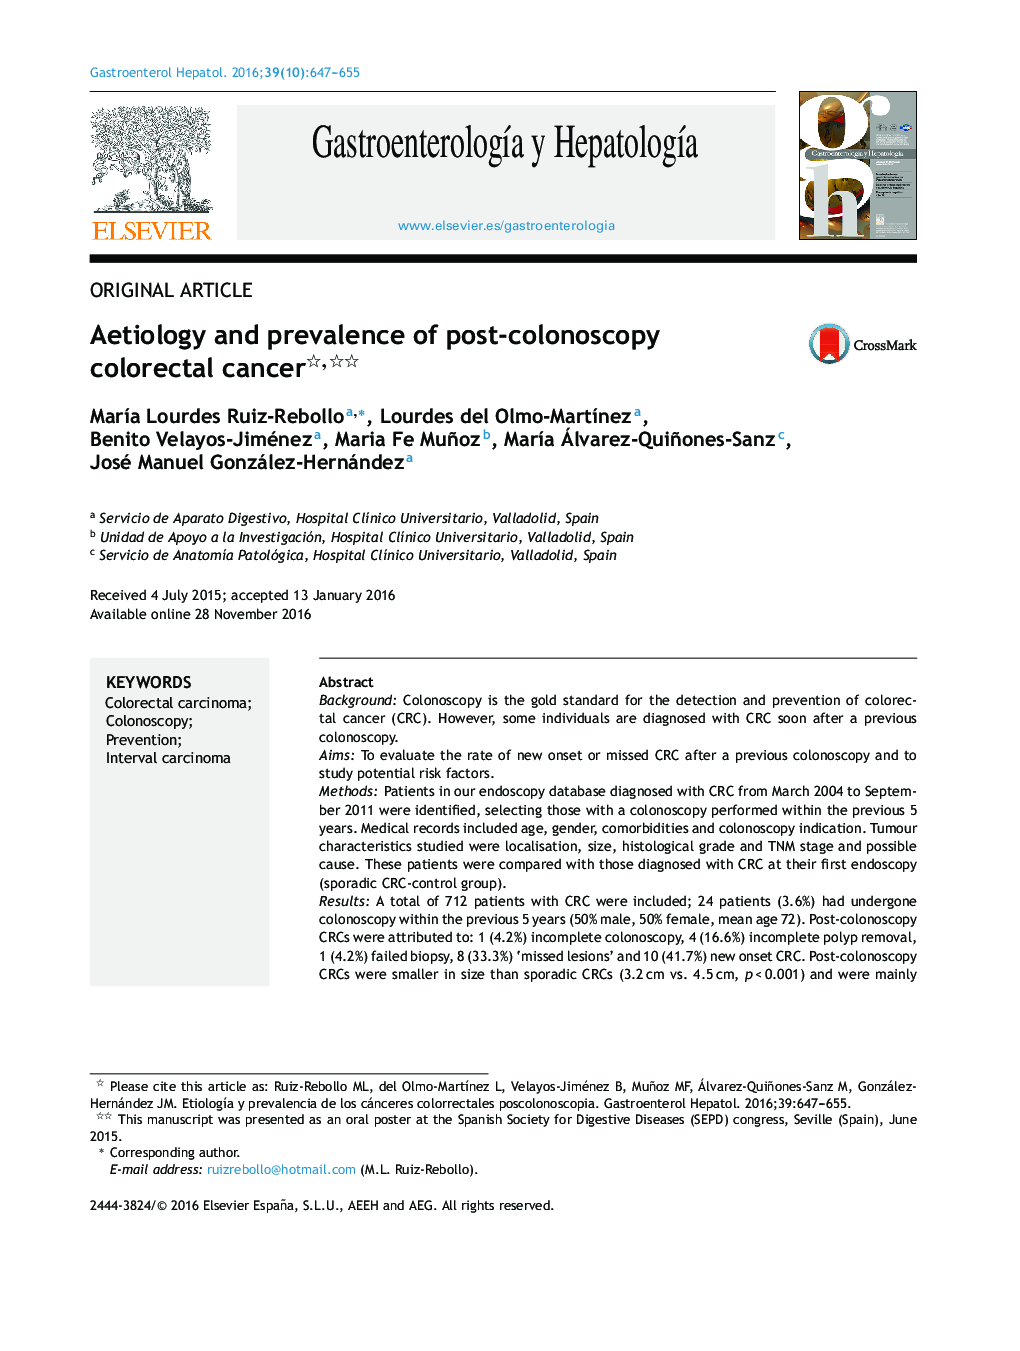 Aetiology and prevalence of post-colonoscopy colorectal cancer